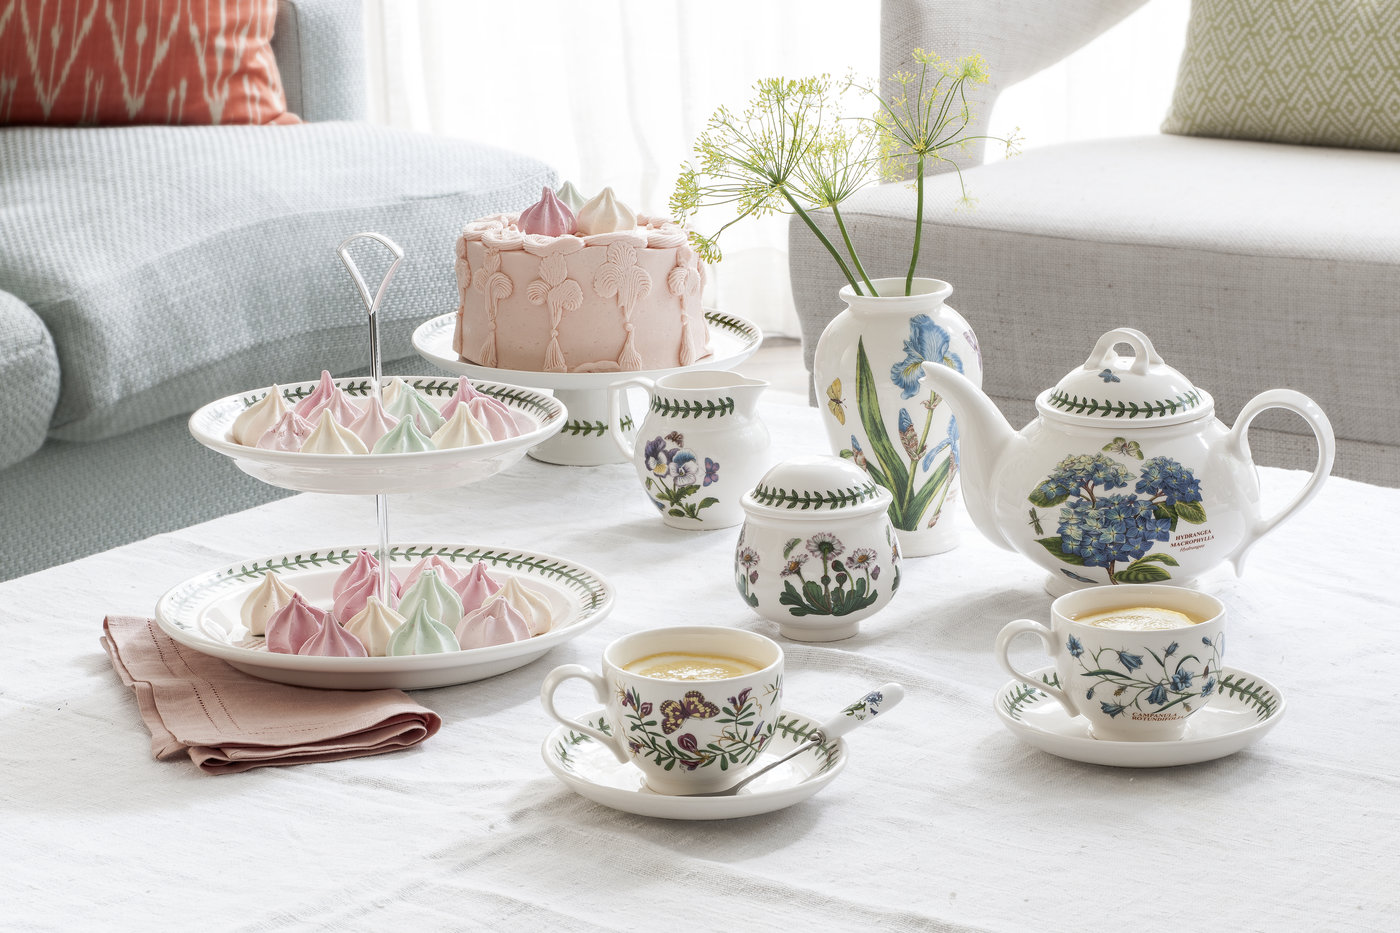 Get Together: How to Organise a Tea Party for your Friends